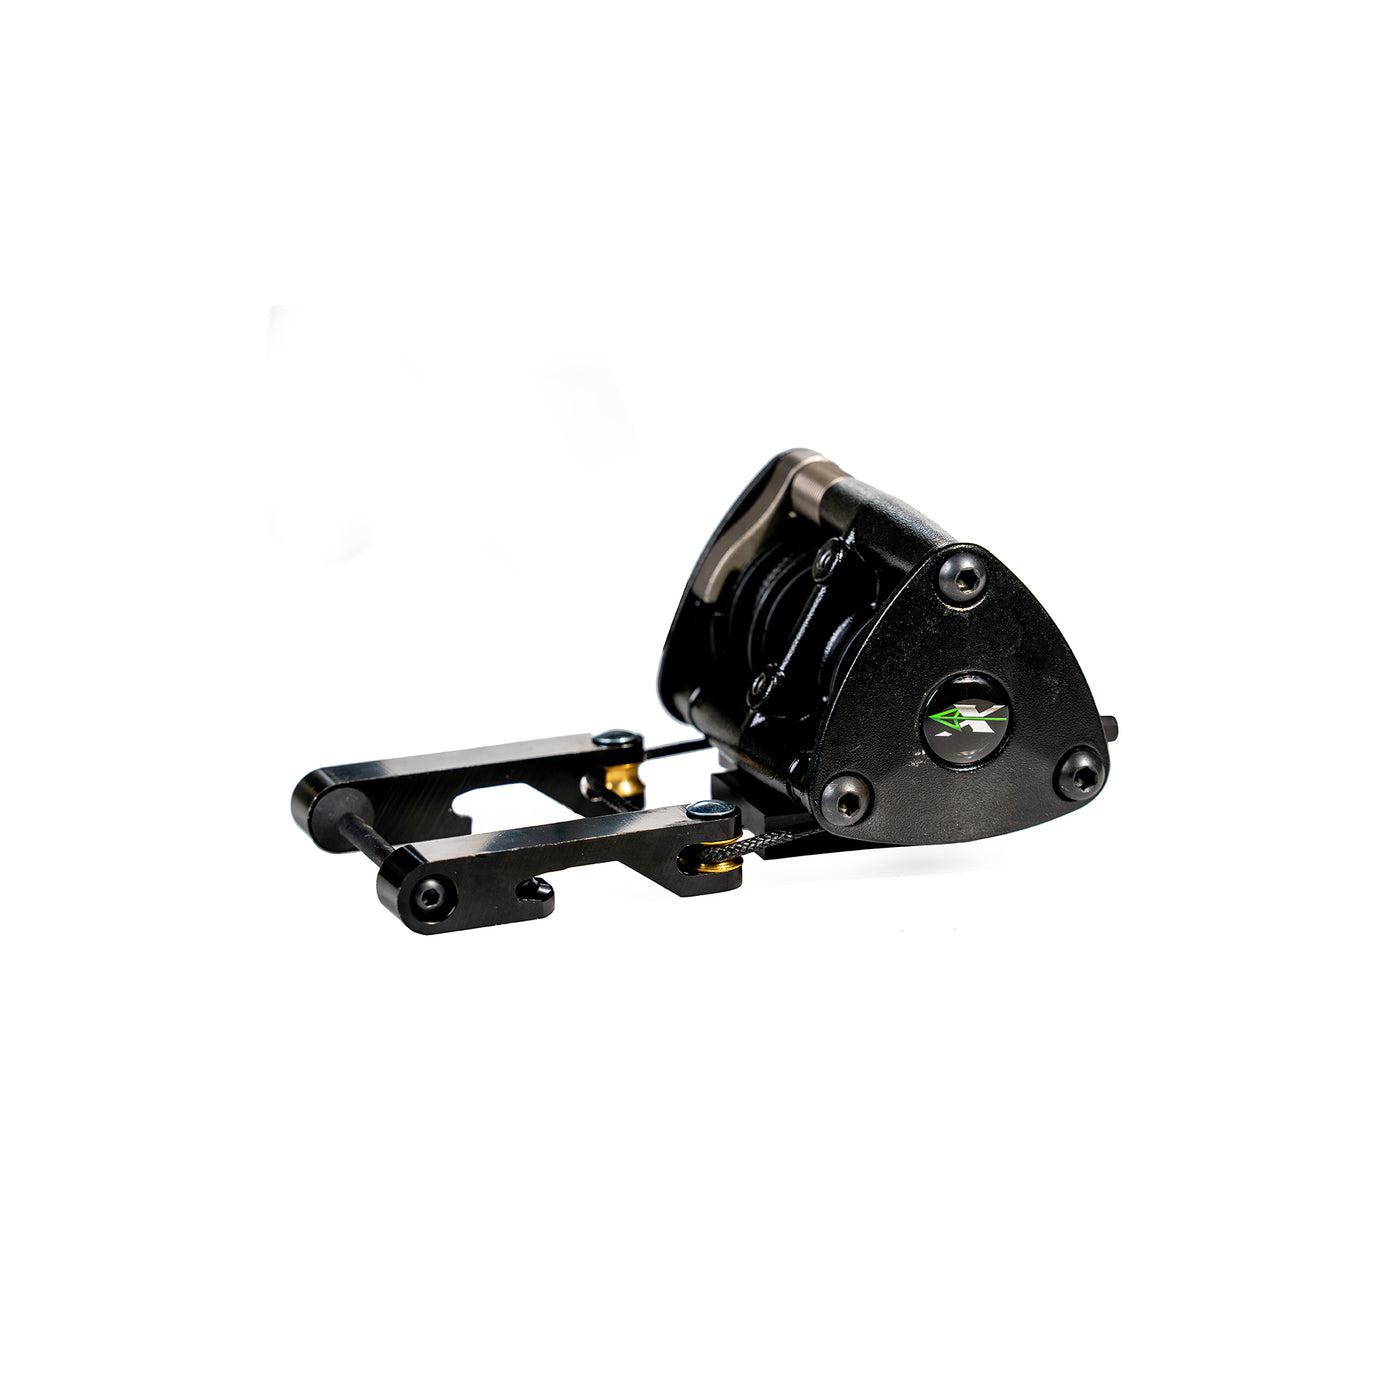 Crossbow Hand Crank – Xpedition Archery